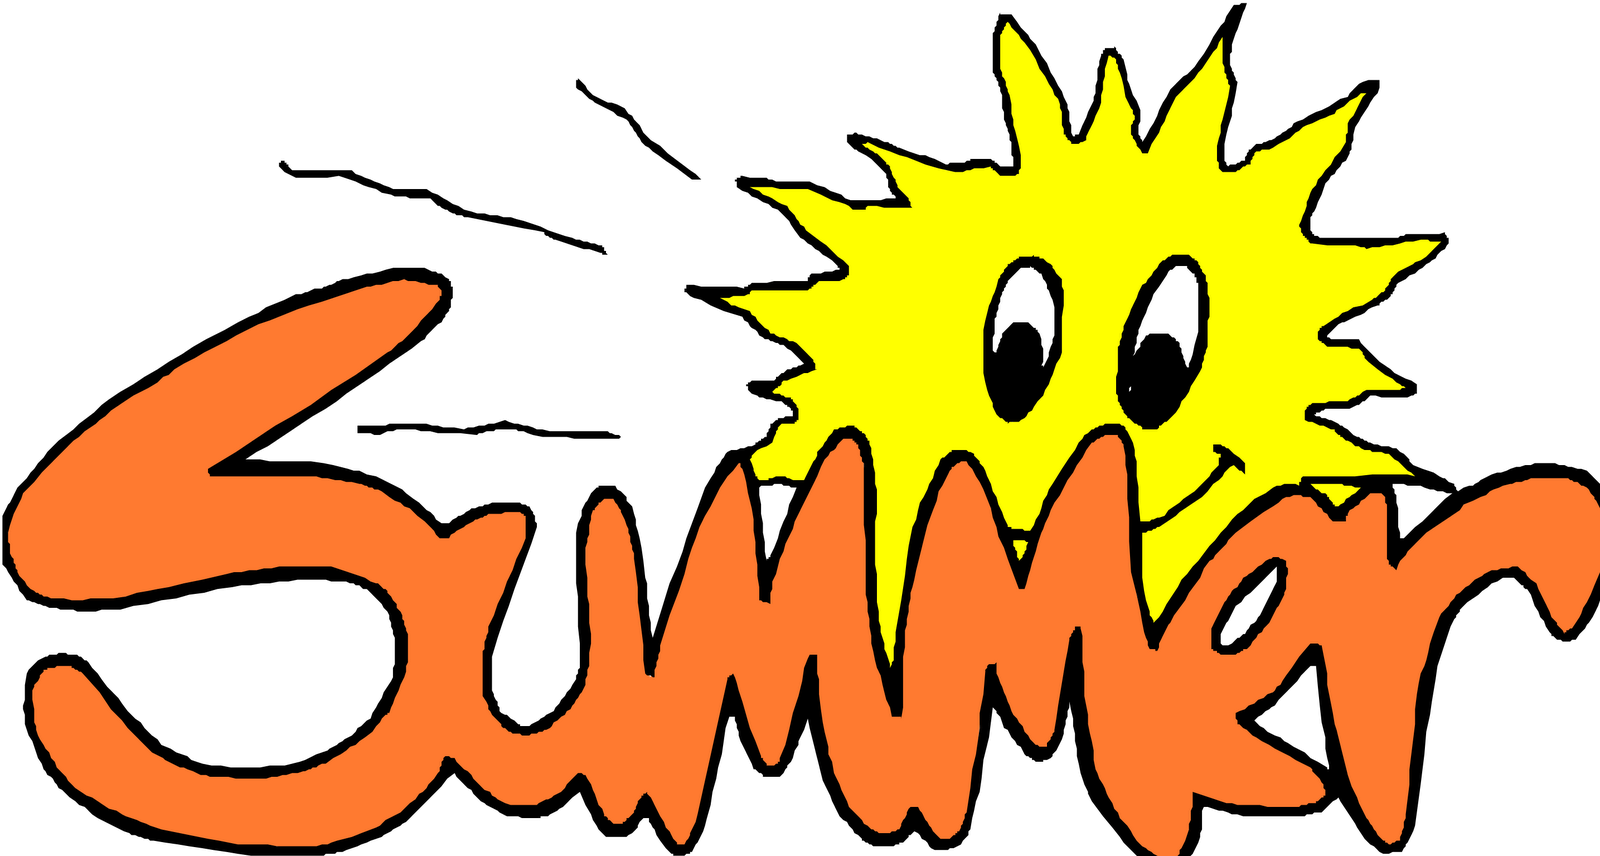 Summer Clip Art Images Free - Free Clipart Images